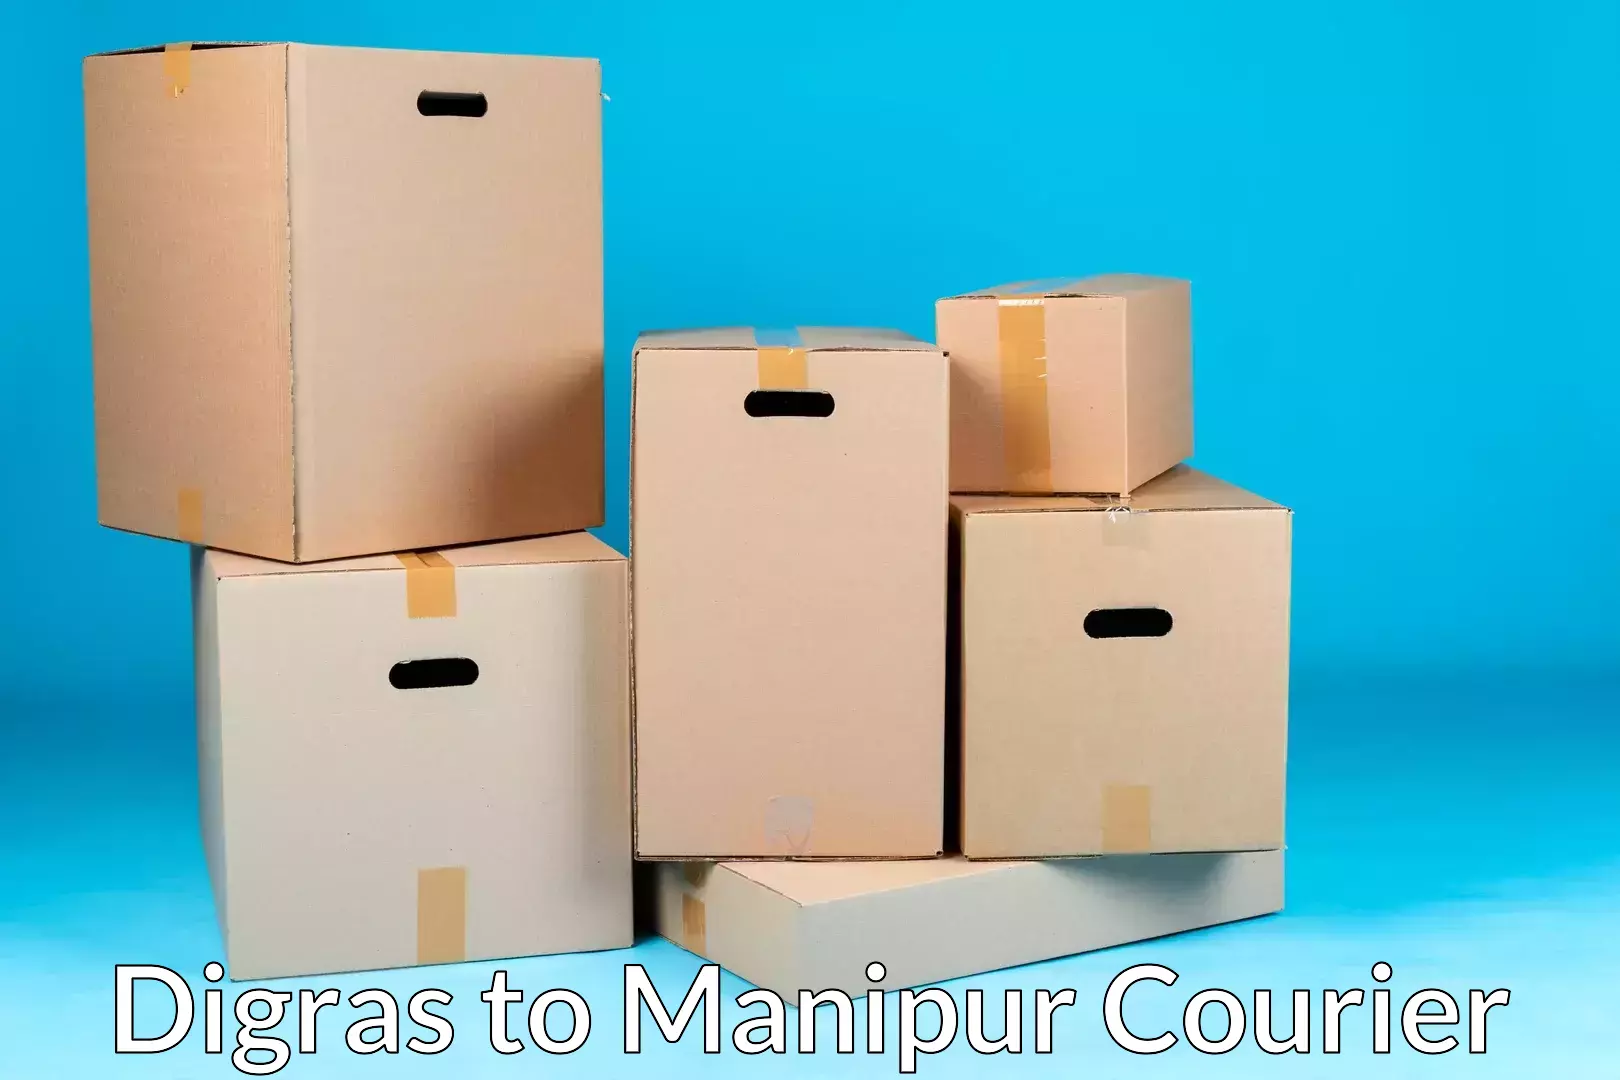 Professional moving company Digras to Manipur